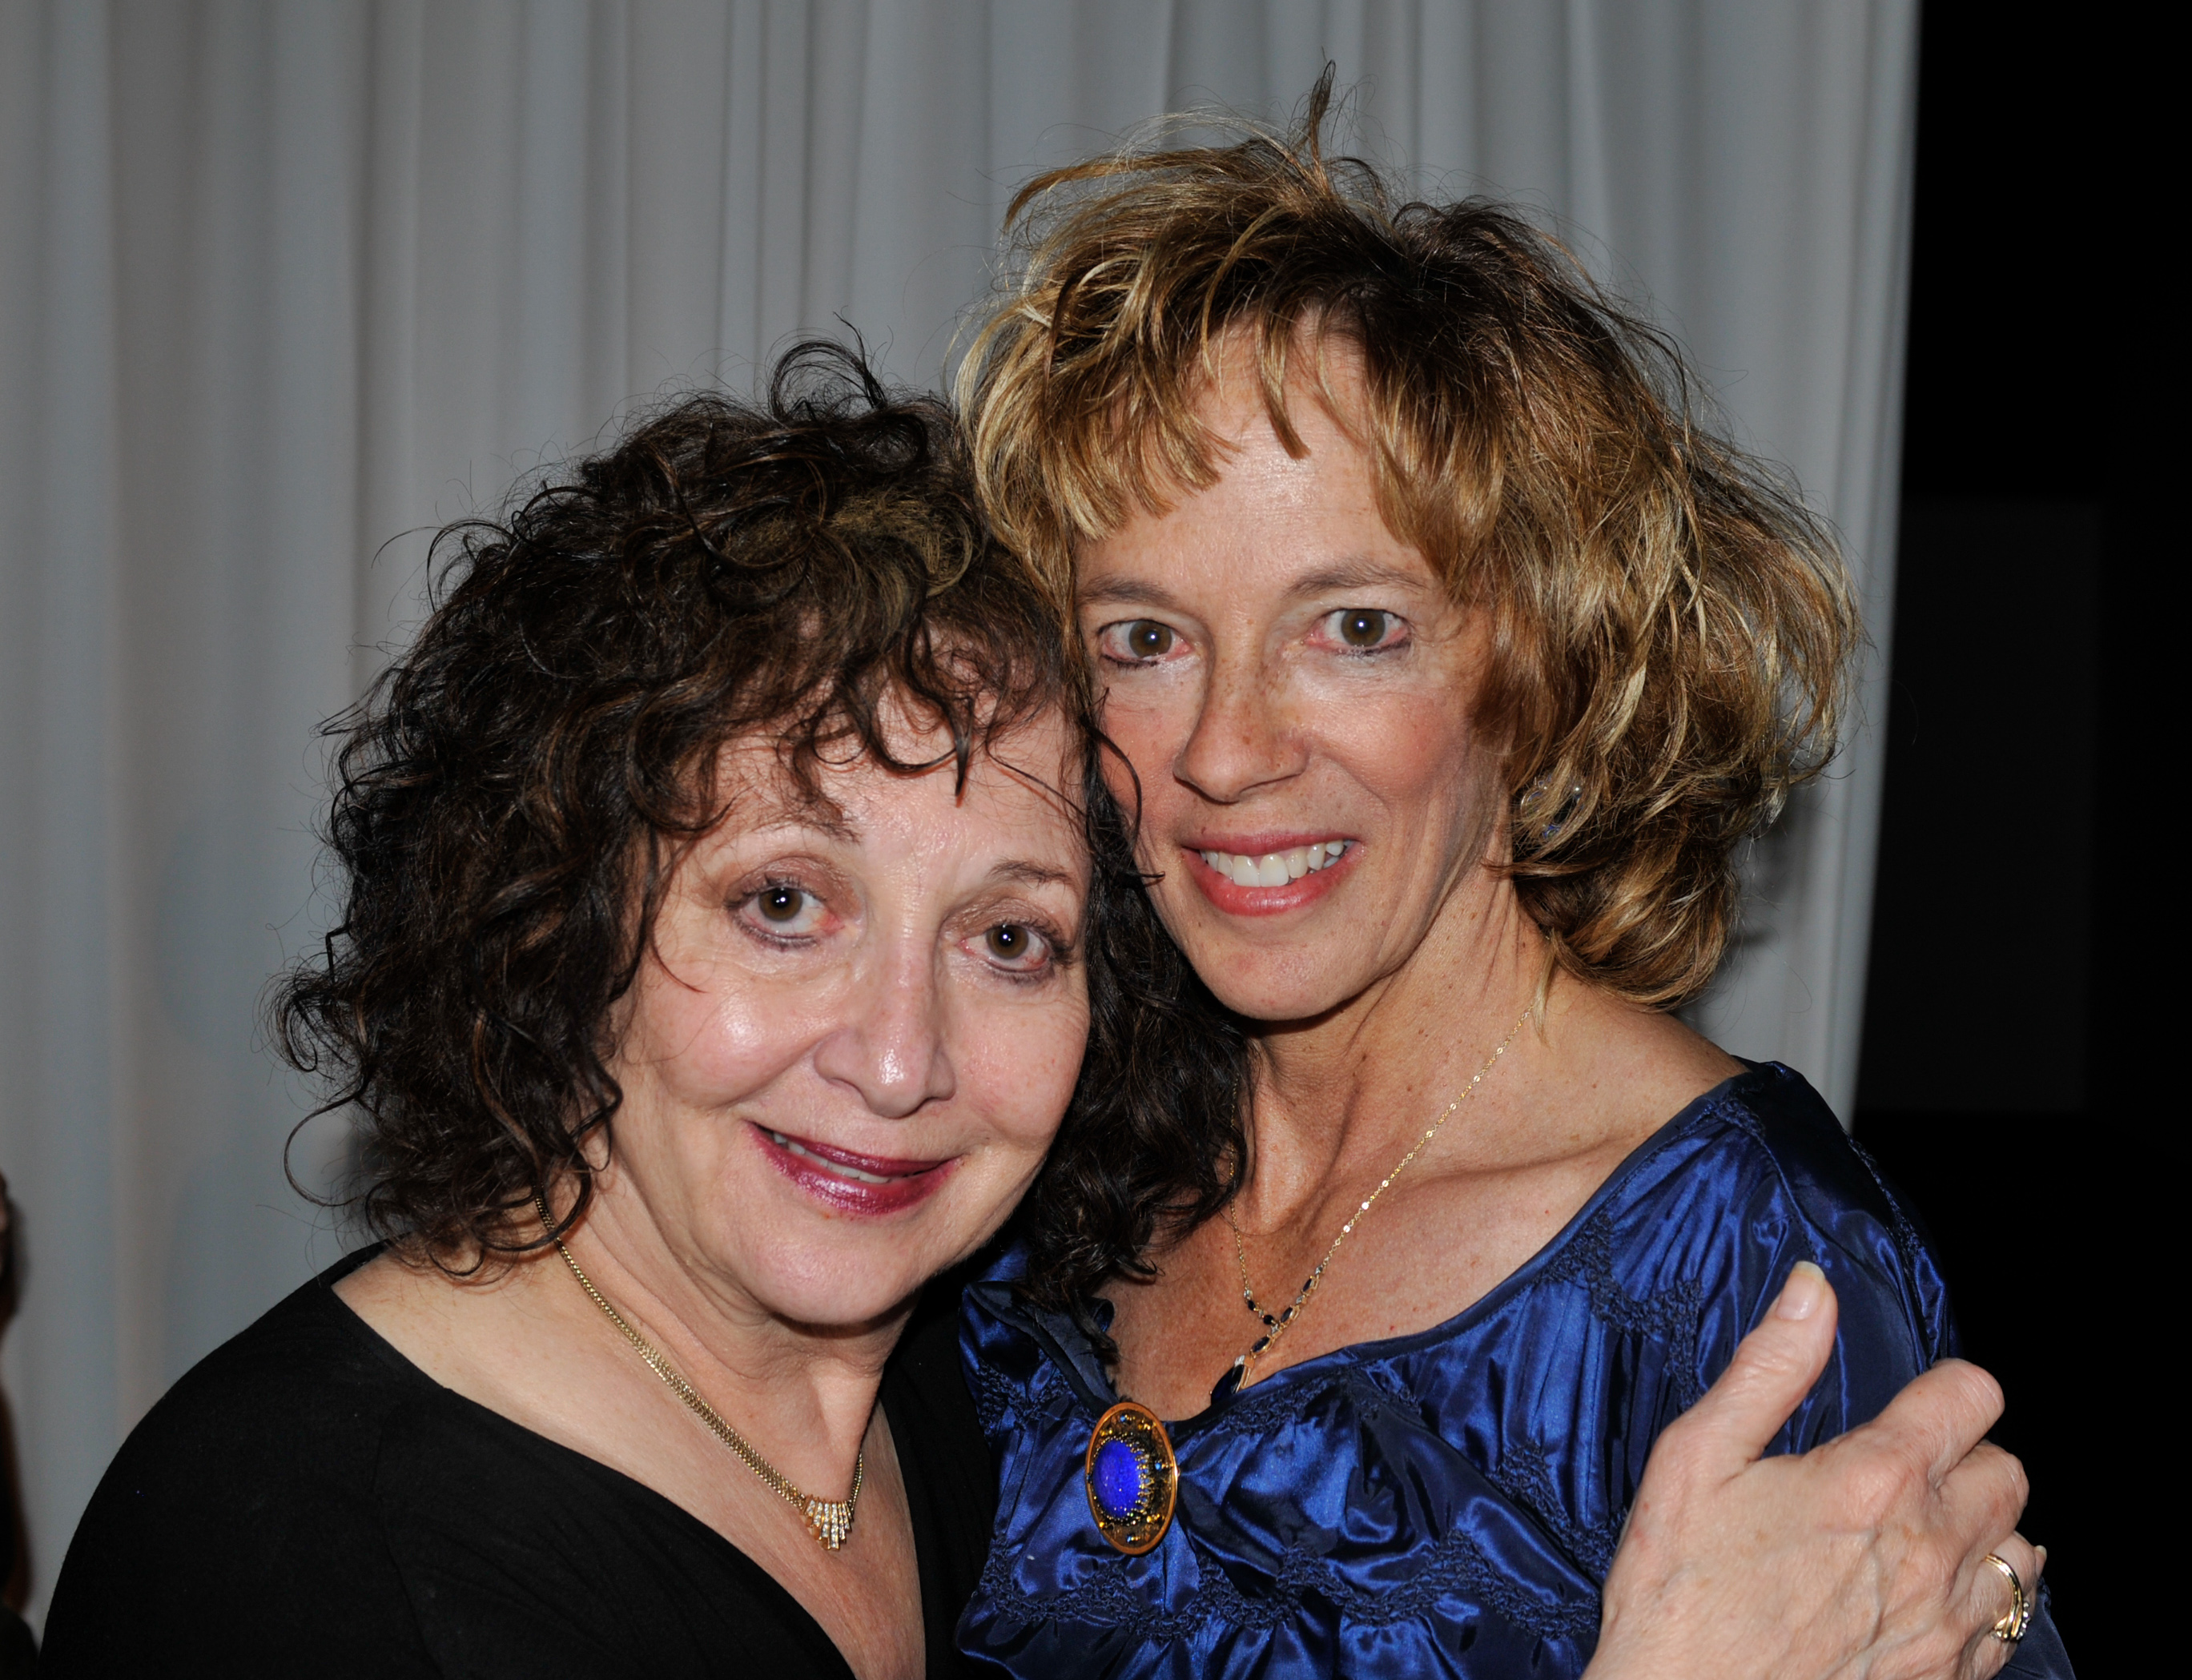 Nancy Koontz and Pam Cress at this year's Have You Met party